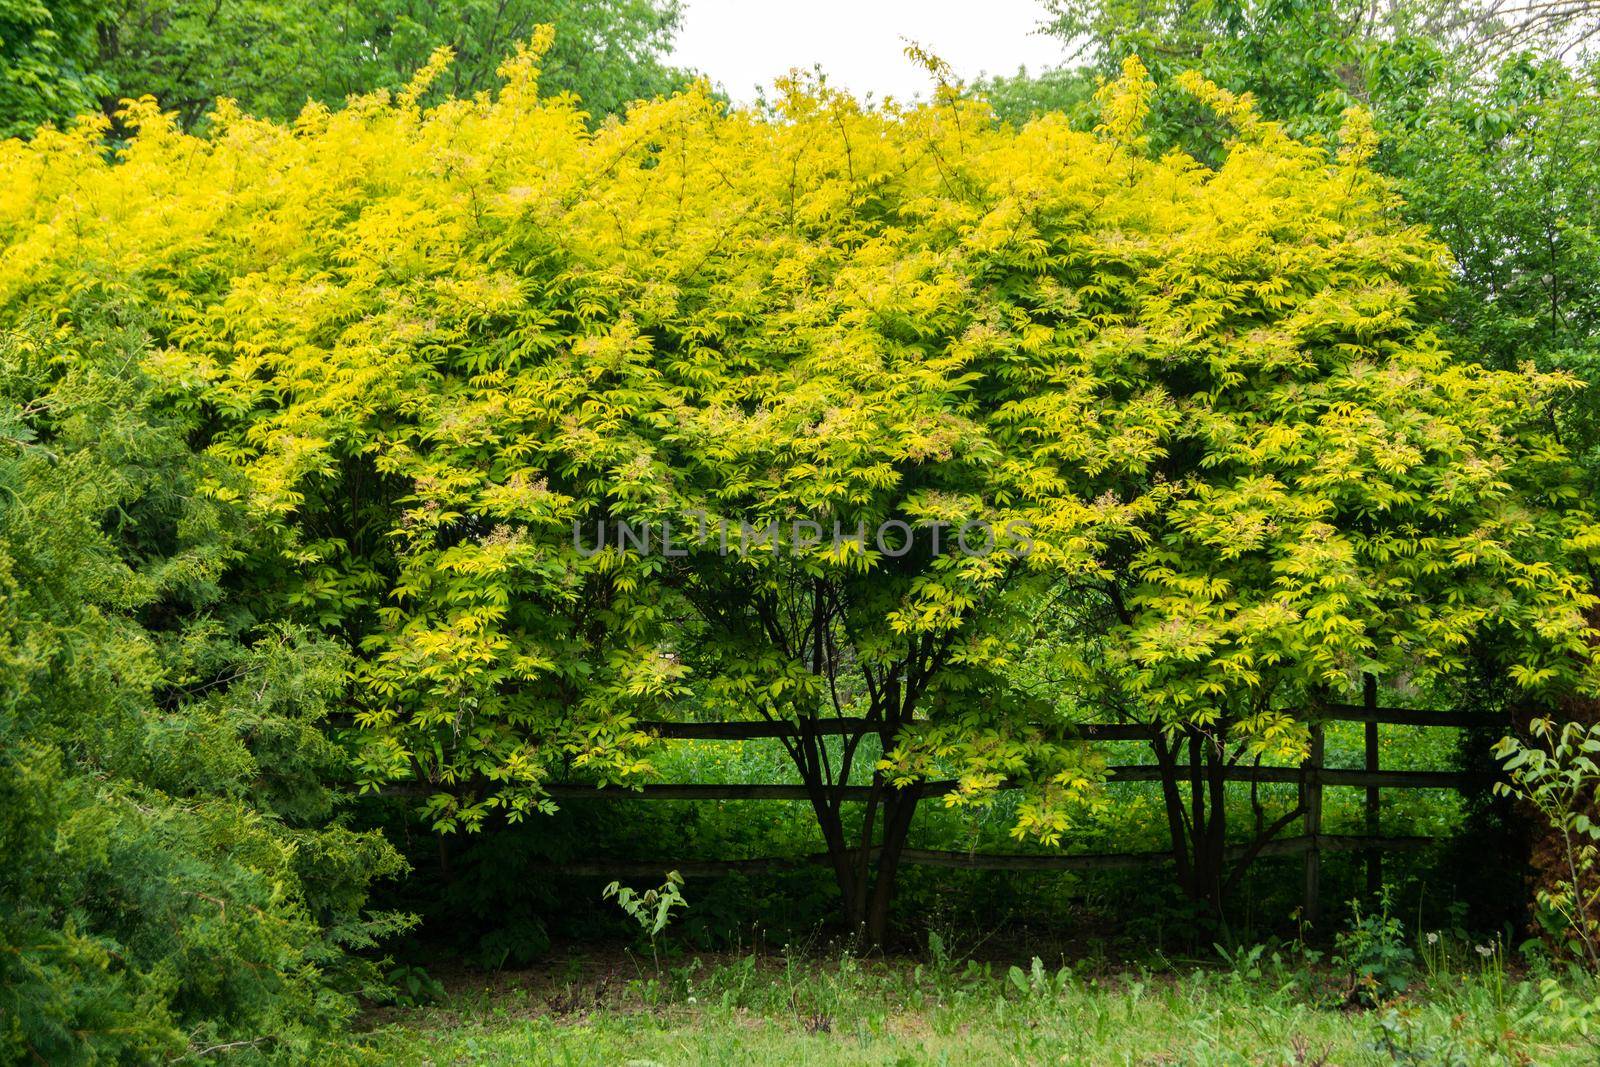 Elder tree with yellow-green leaves. Blurred focus.